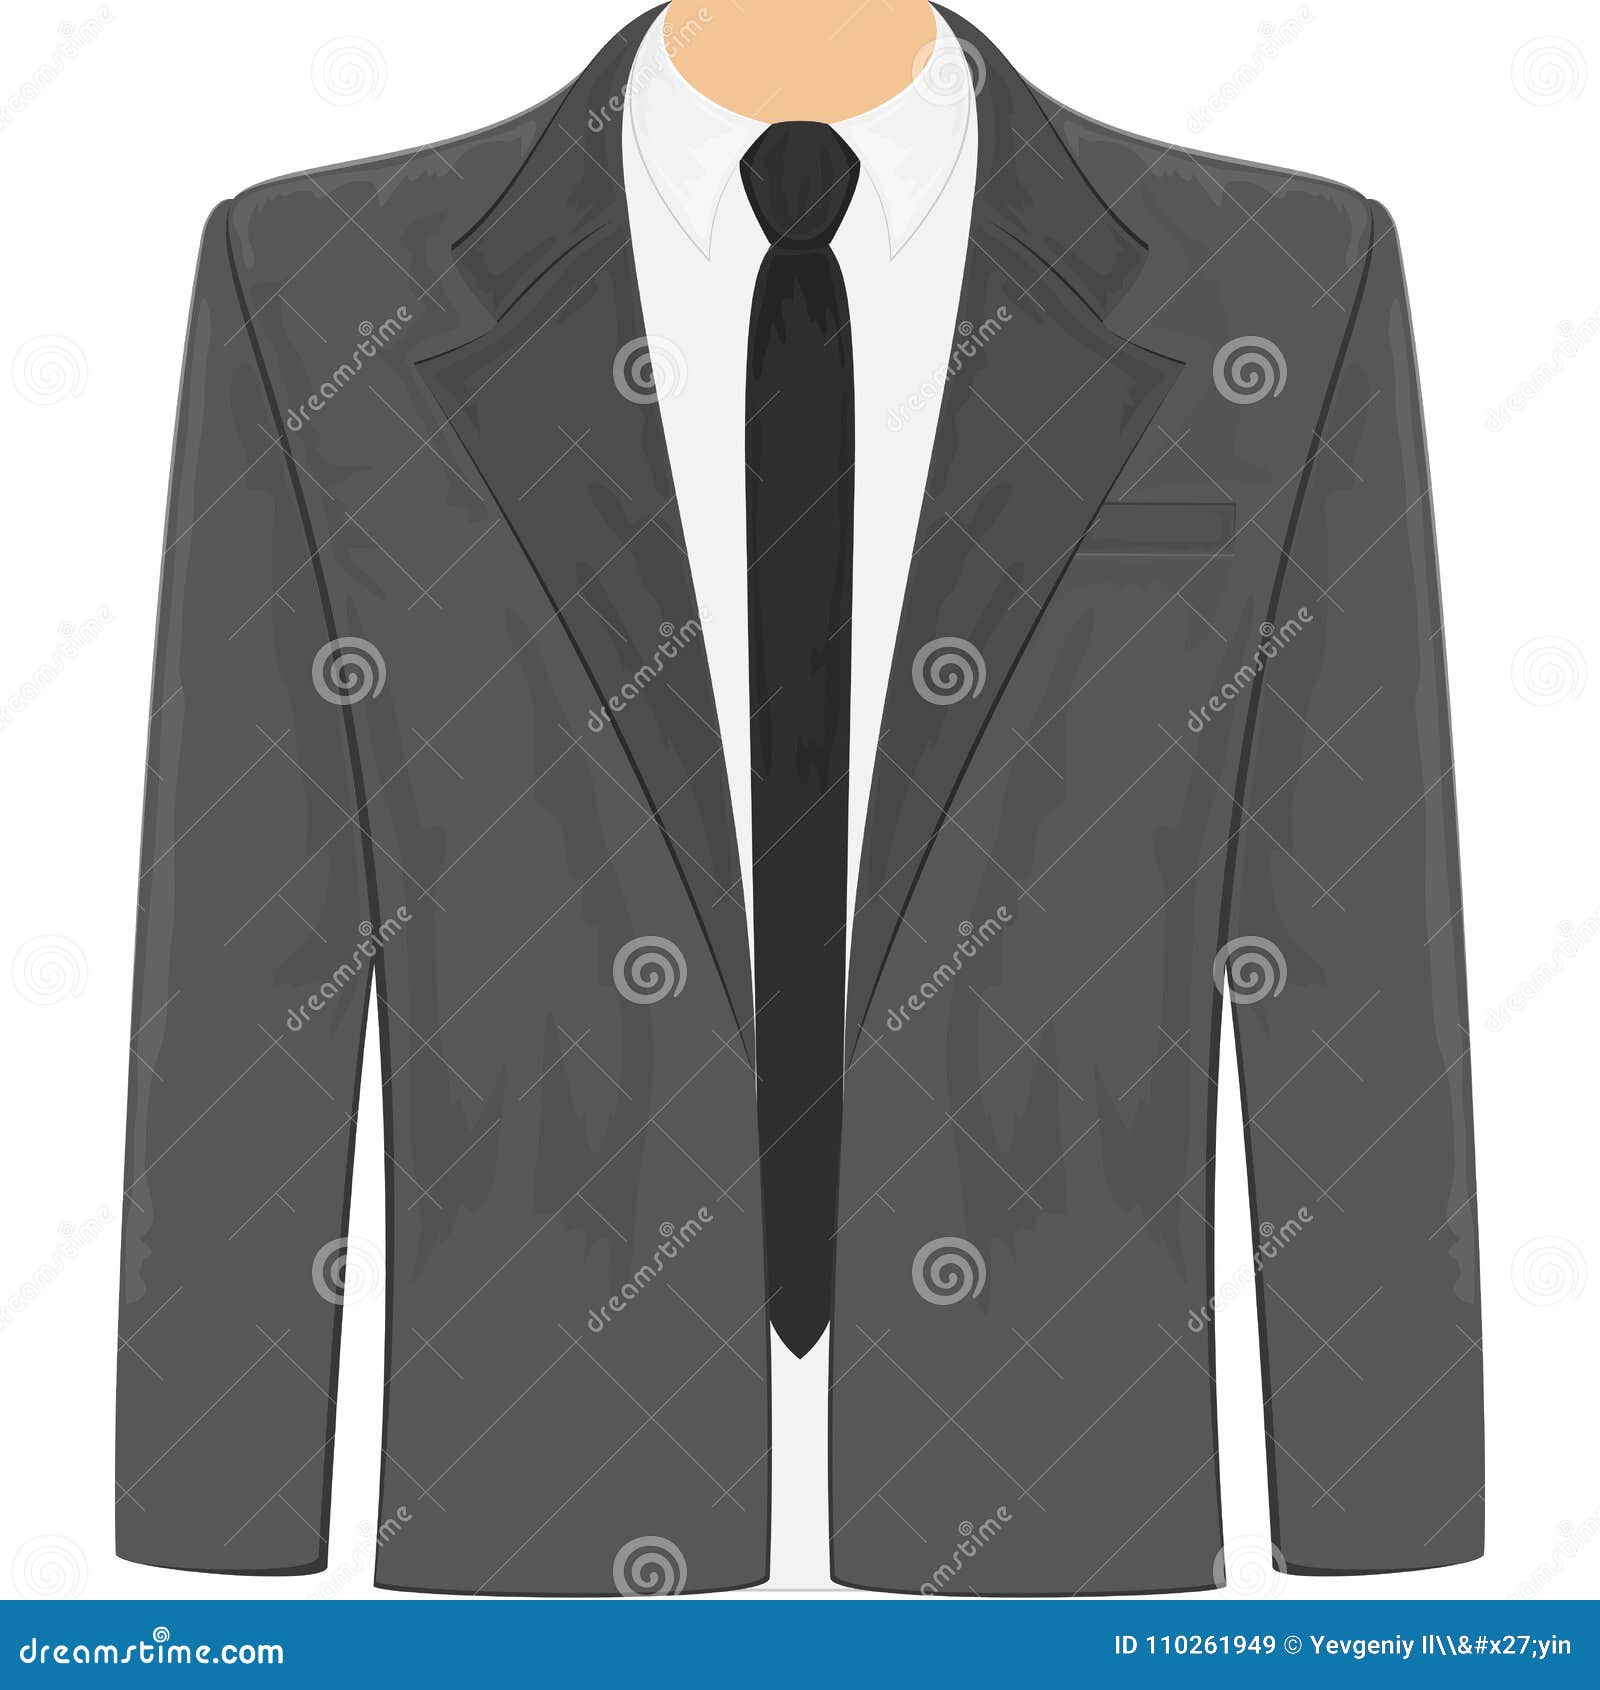 Black men suit with tie stock vector. Illustration of business - 110261949